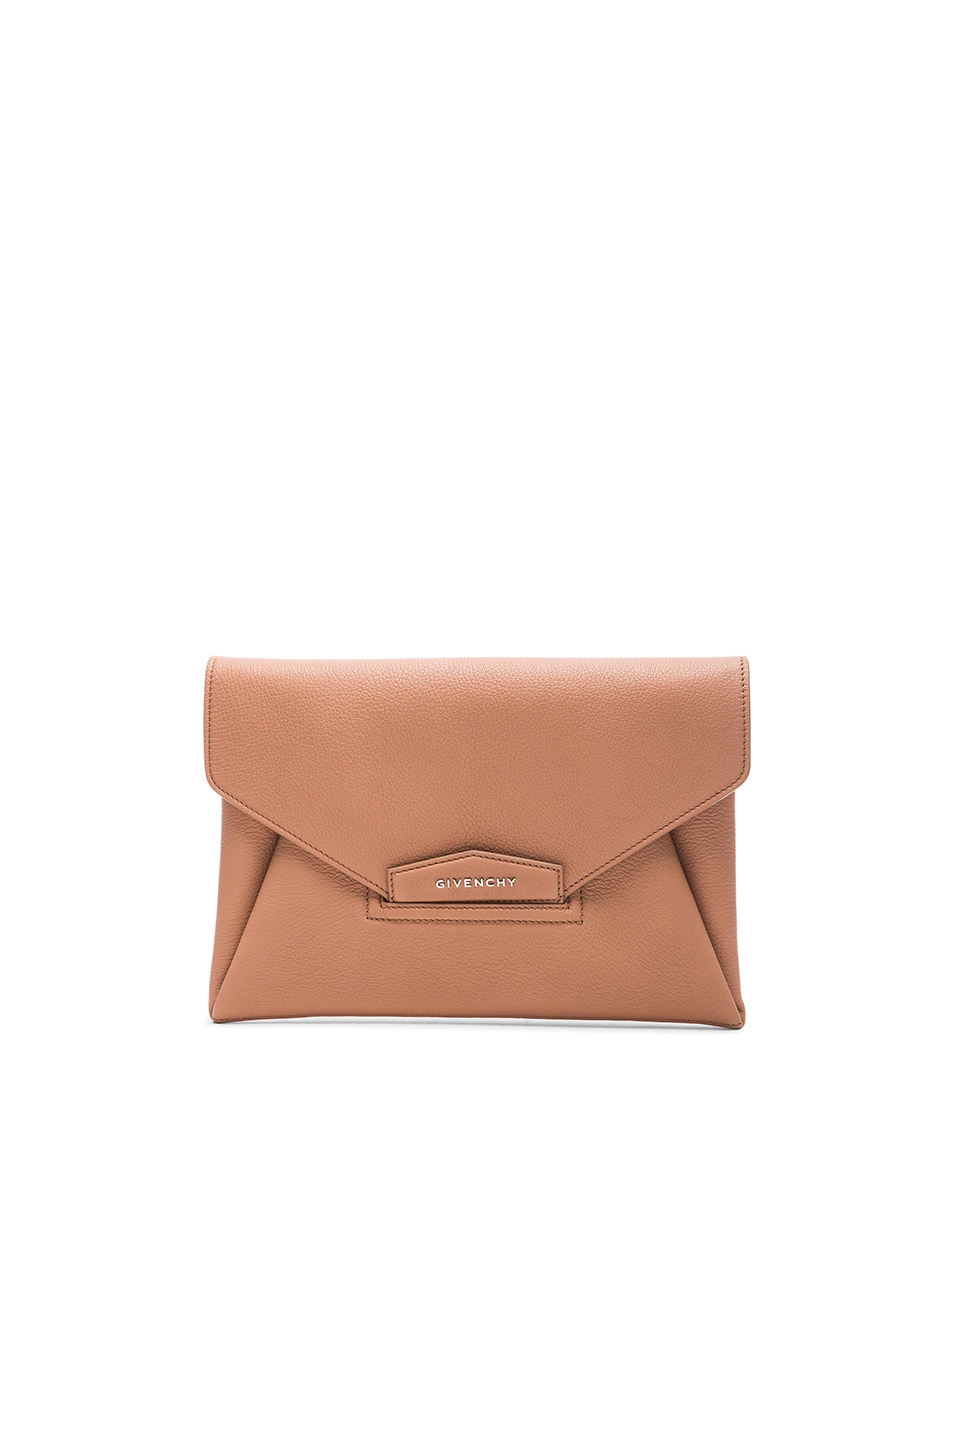 Image 1 of Givenchy Antigona Medium Clutch in Old Pink